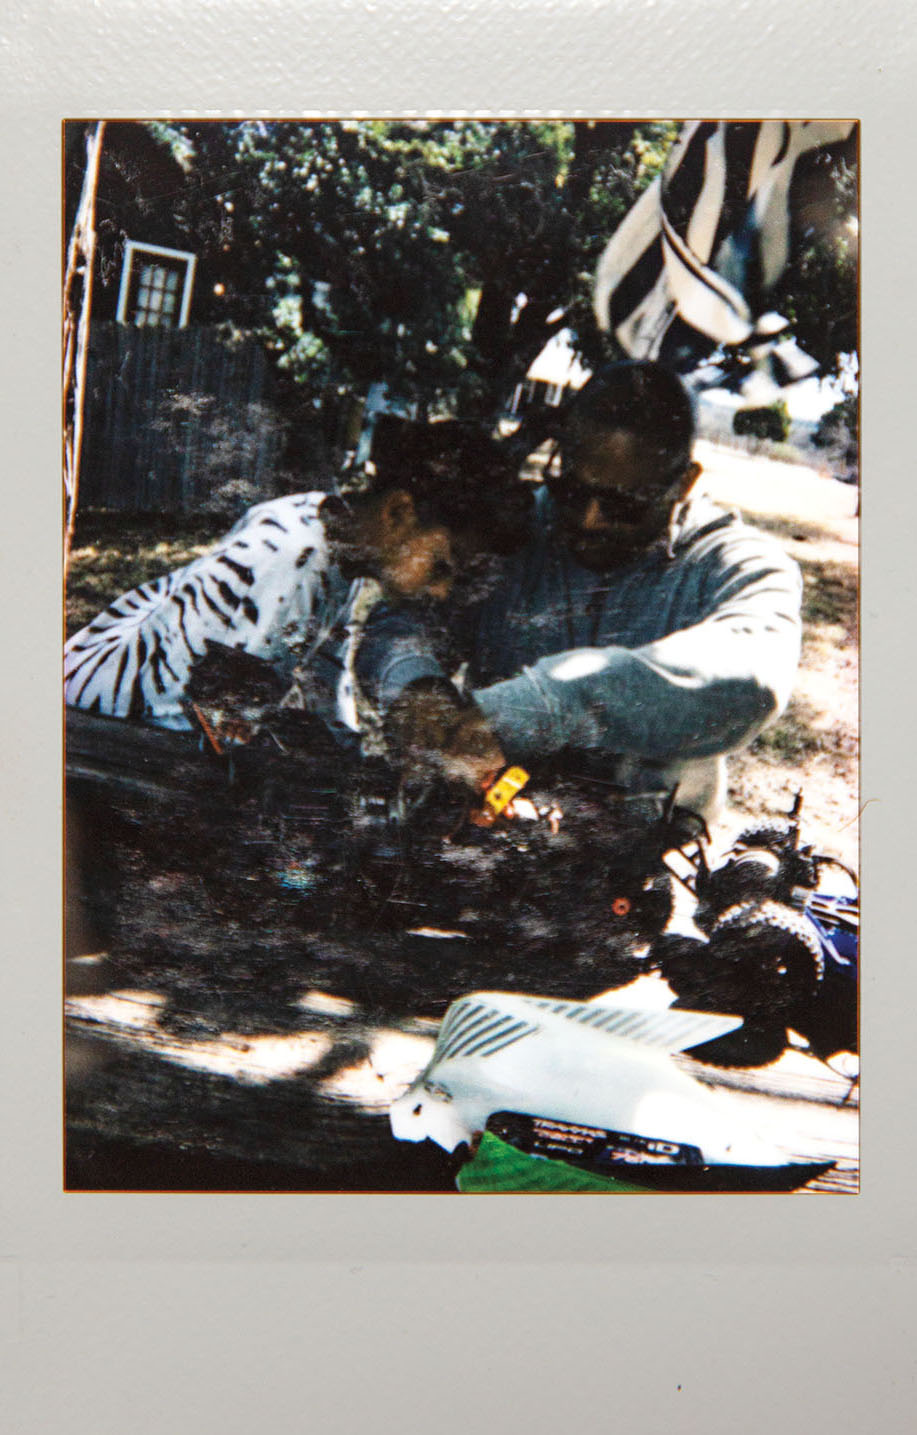 A Polaroid picture of a man and a young man working on an RC car in an outdoor setting